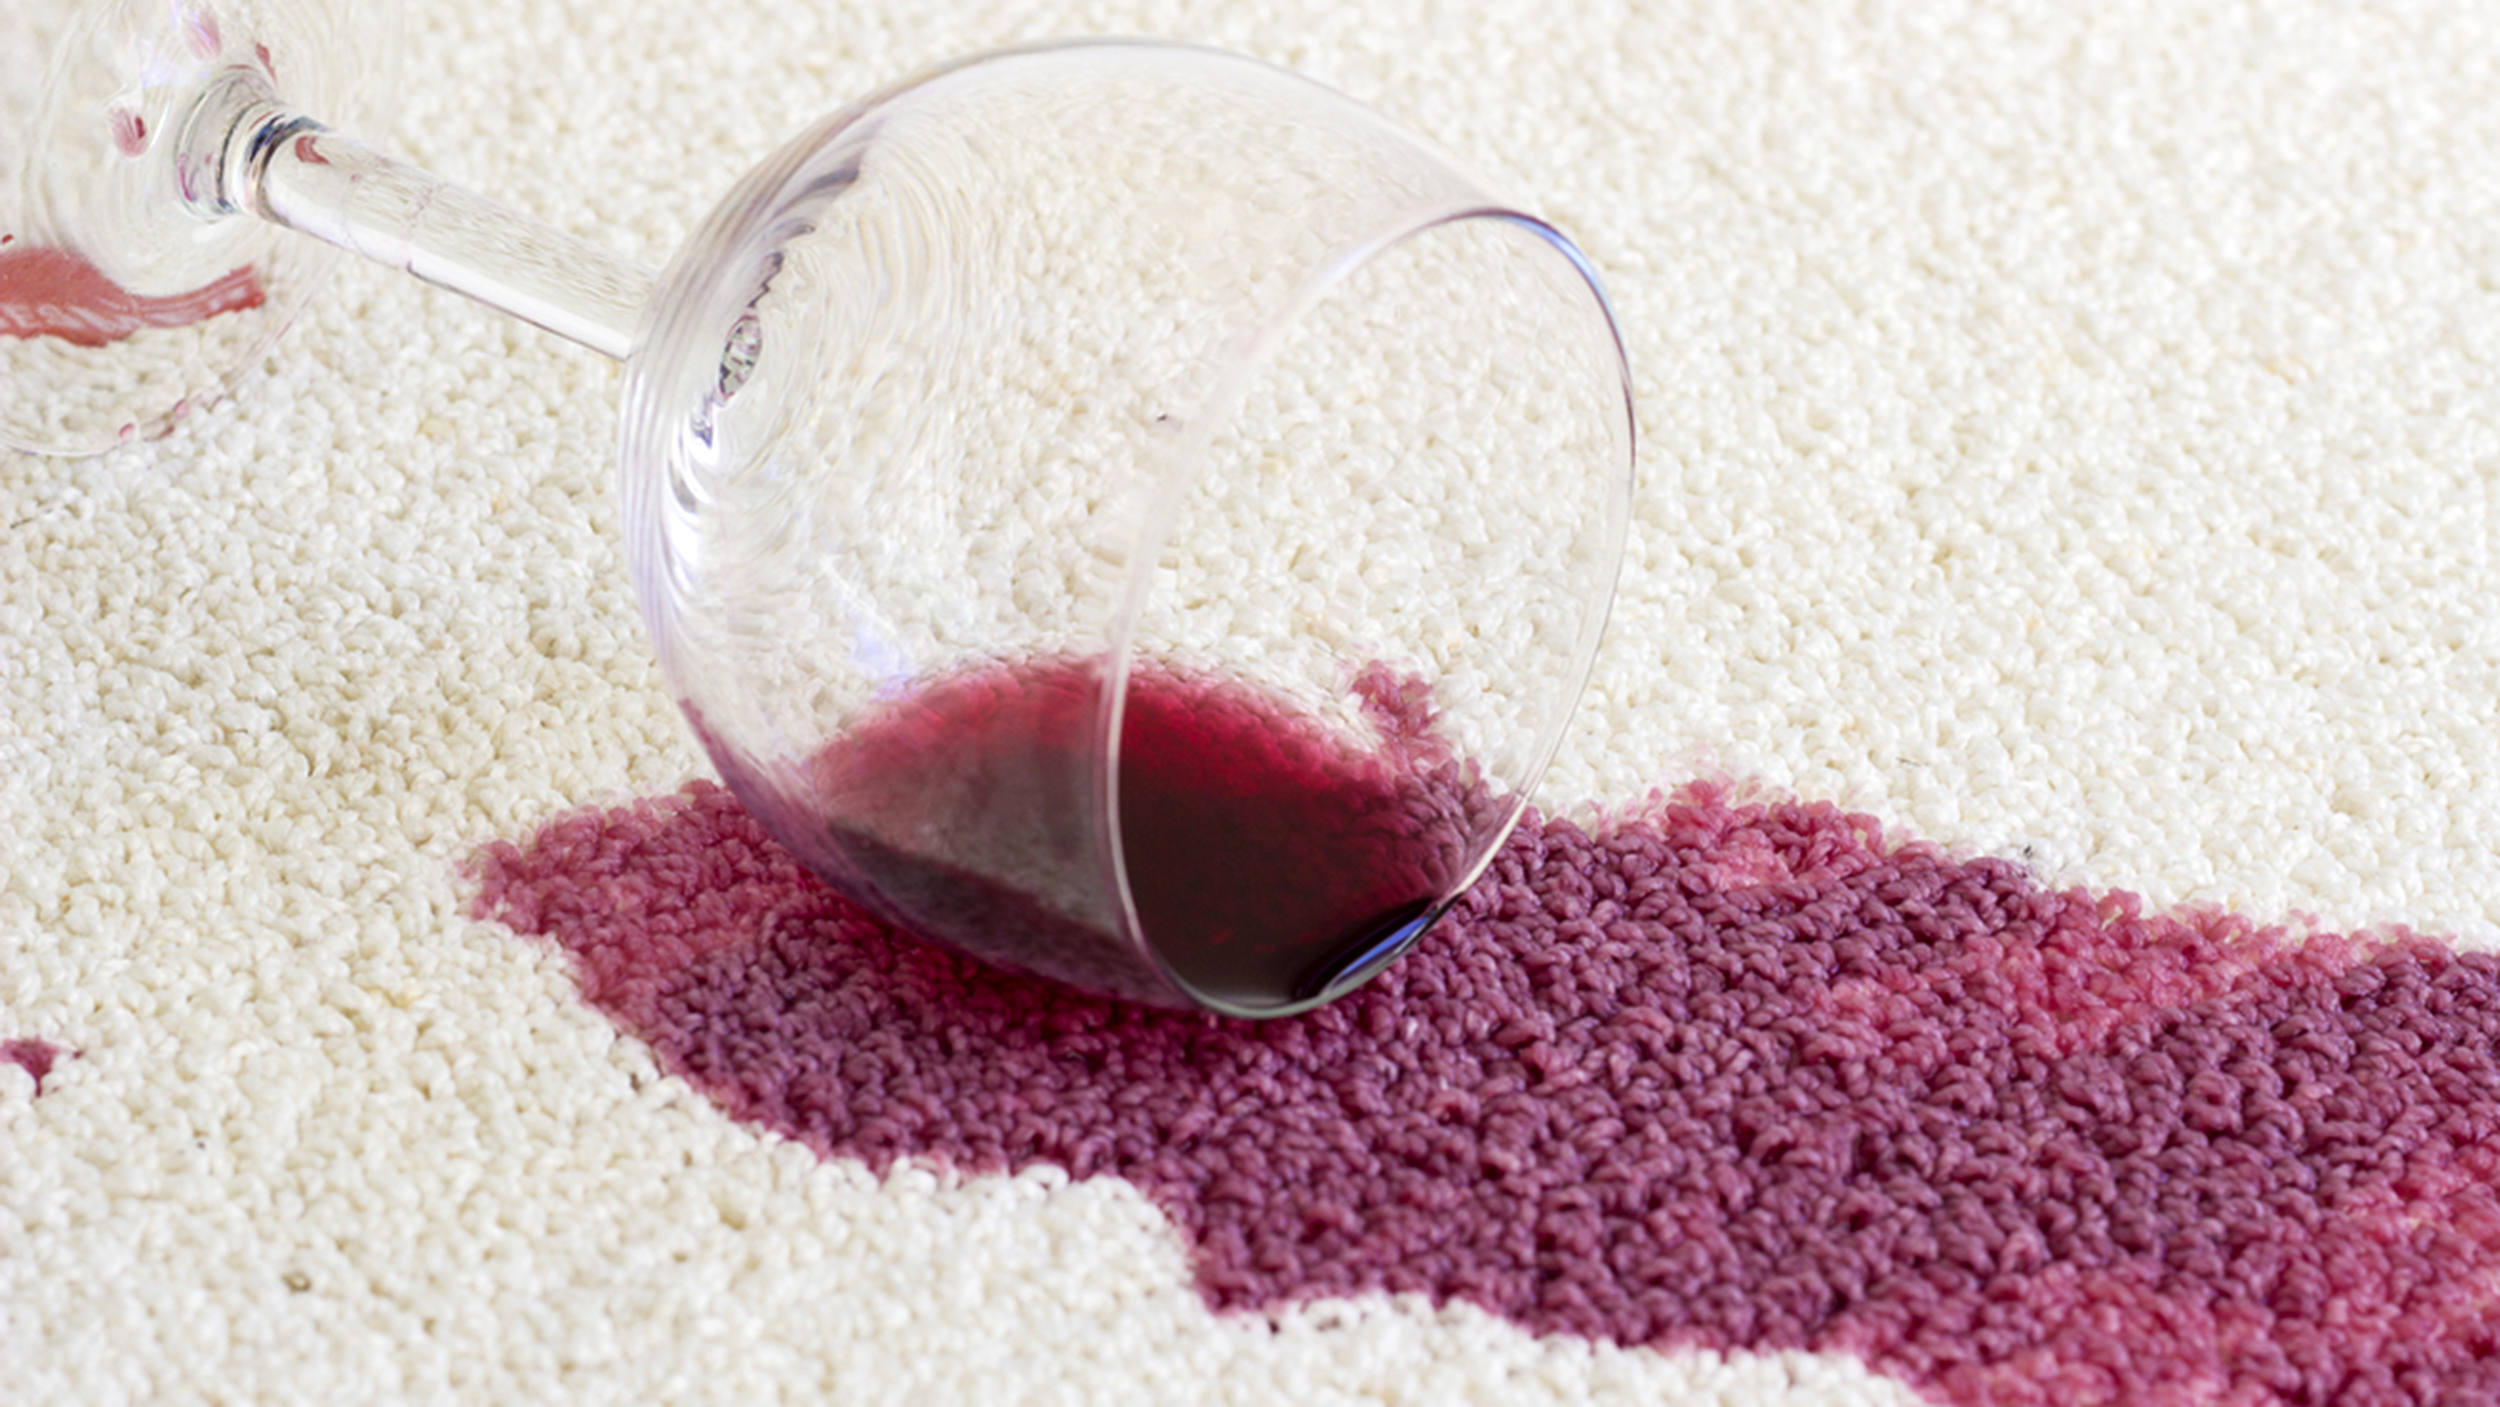 How to remove red wine stains from clothes, carpets and furniture